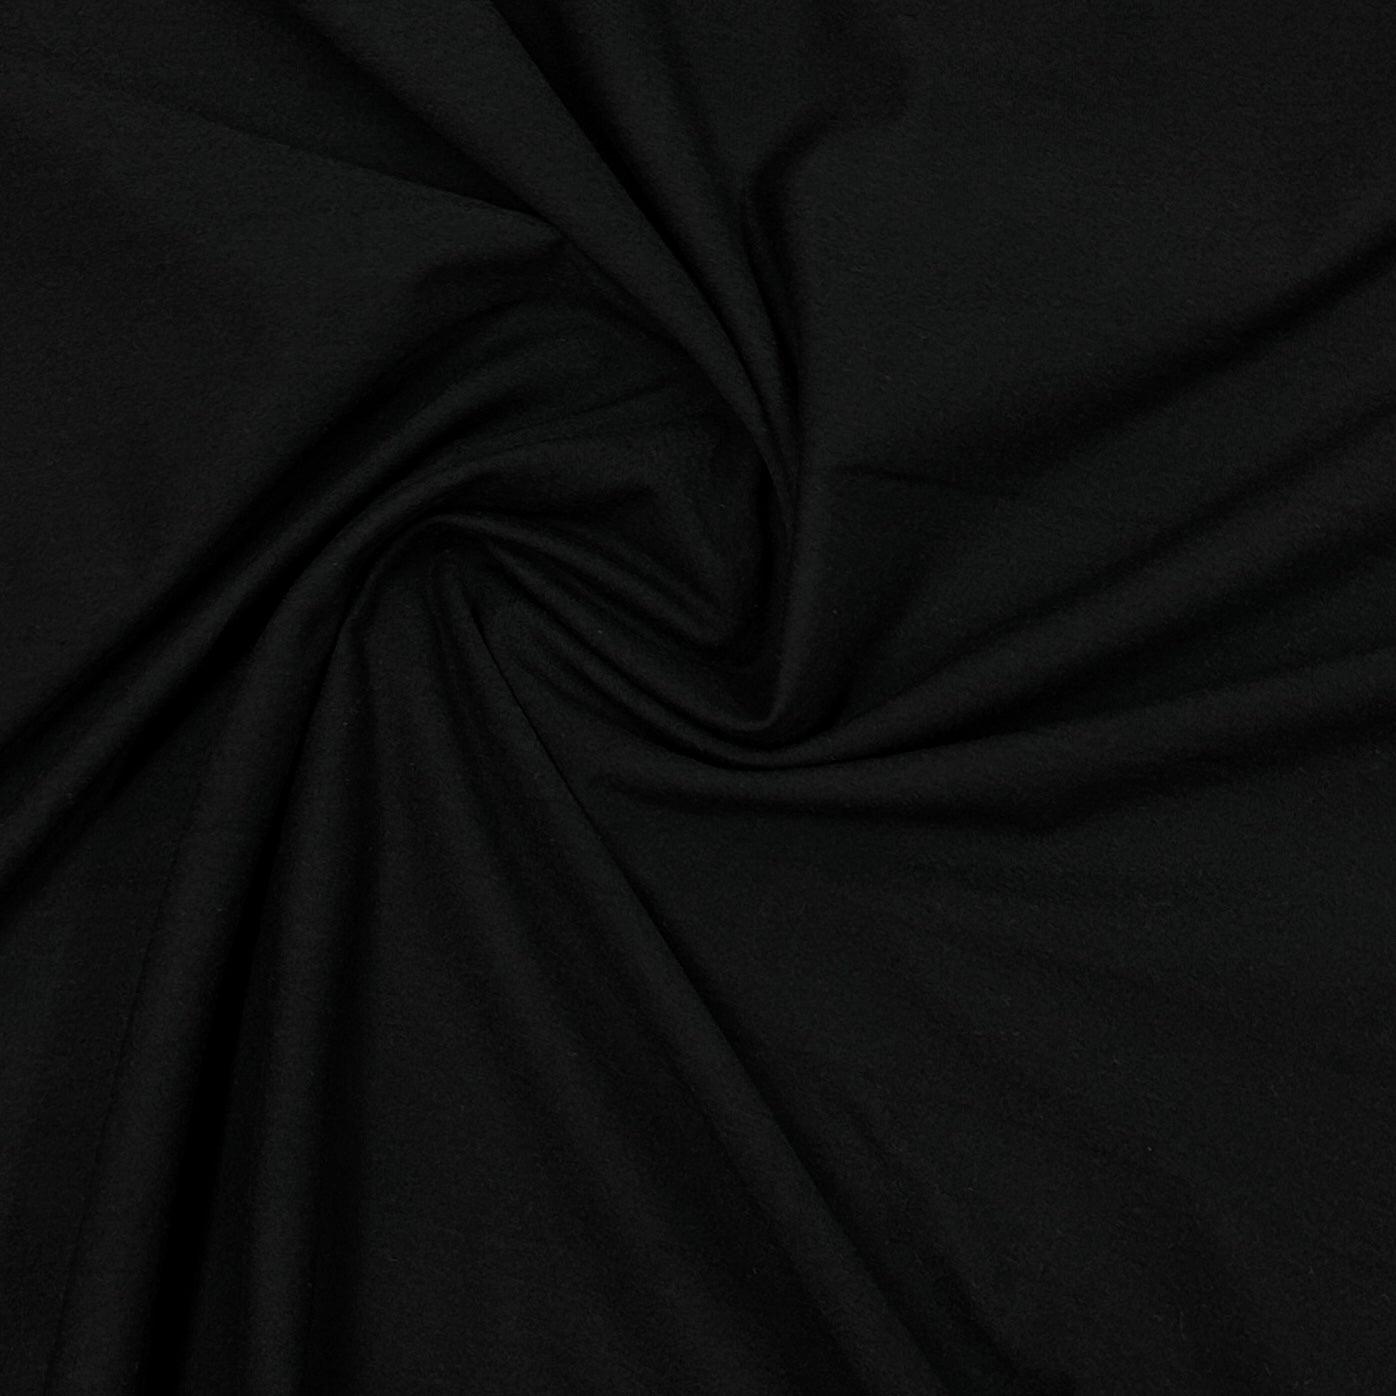 Black Bamboo/Spandex Jersey Fabric - 265 GSM - Knit in the USA - Nature's Fabrics